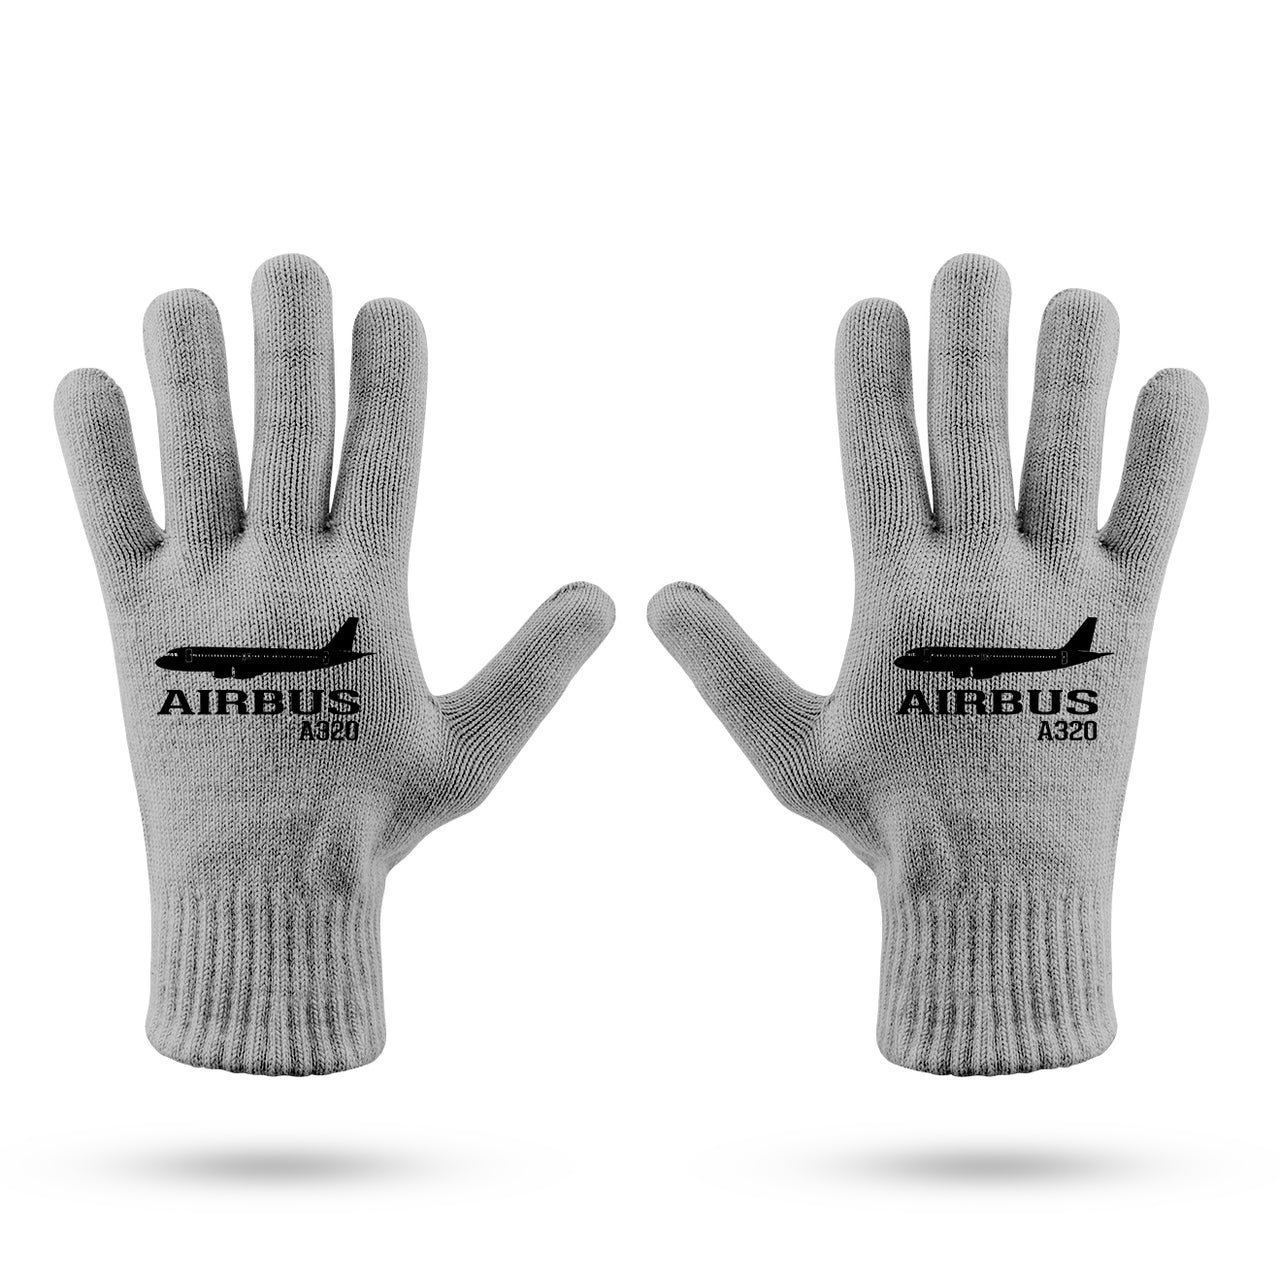 Airbus A320 Printed Designed Gloves